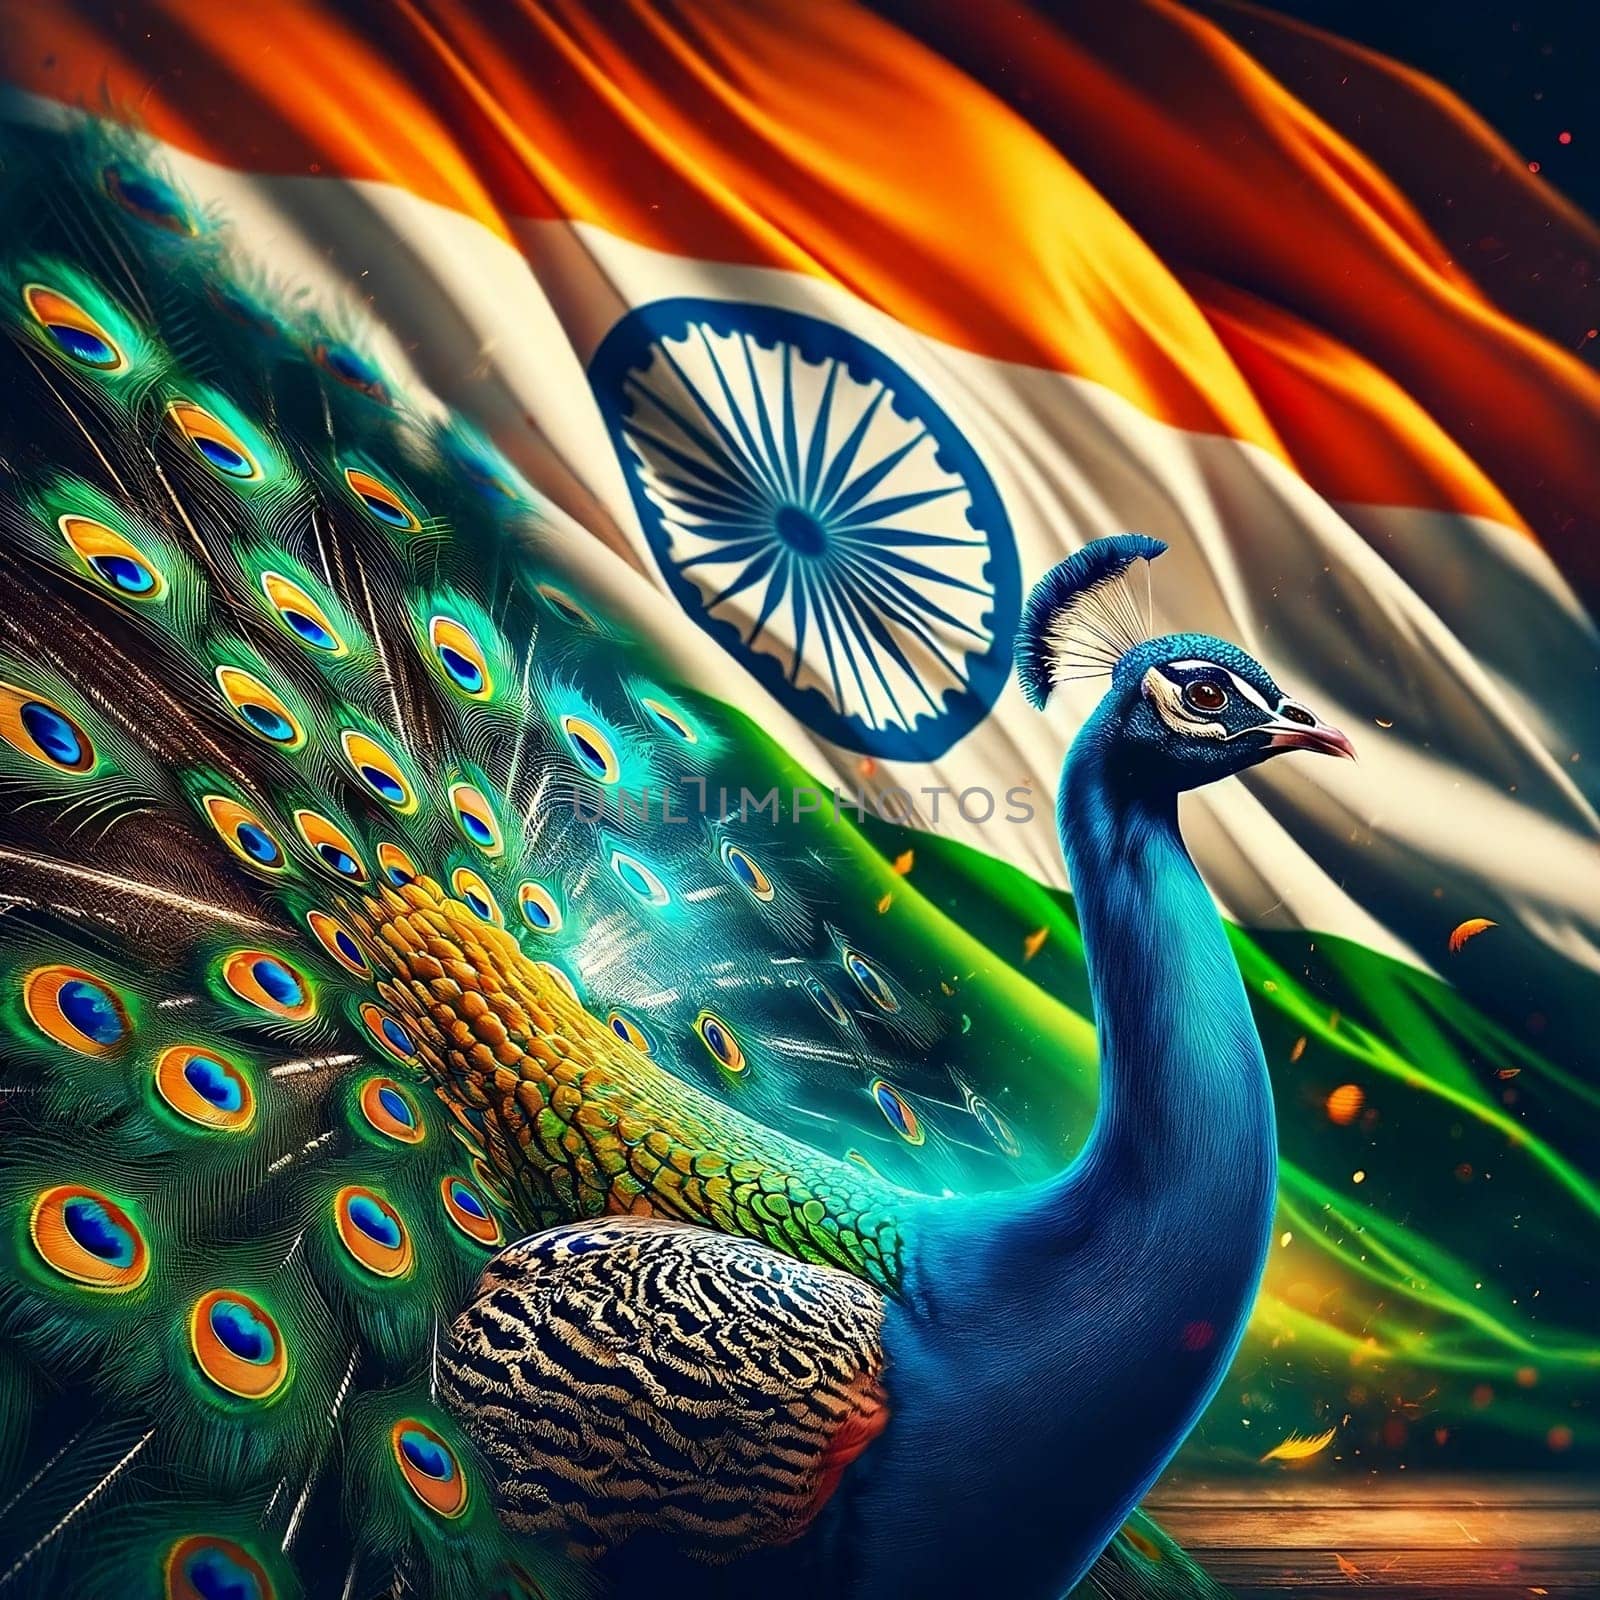 National Bird of India, The Indian peacock, stands in front of an Indian flag by SweCreatives